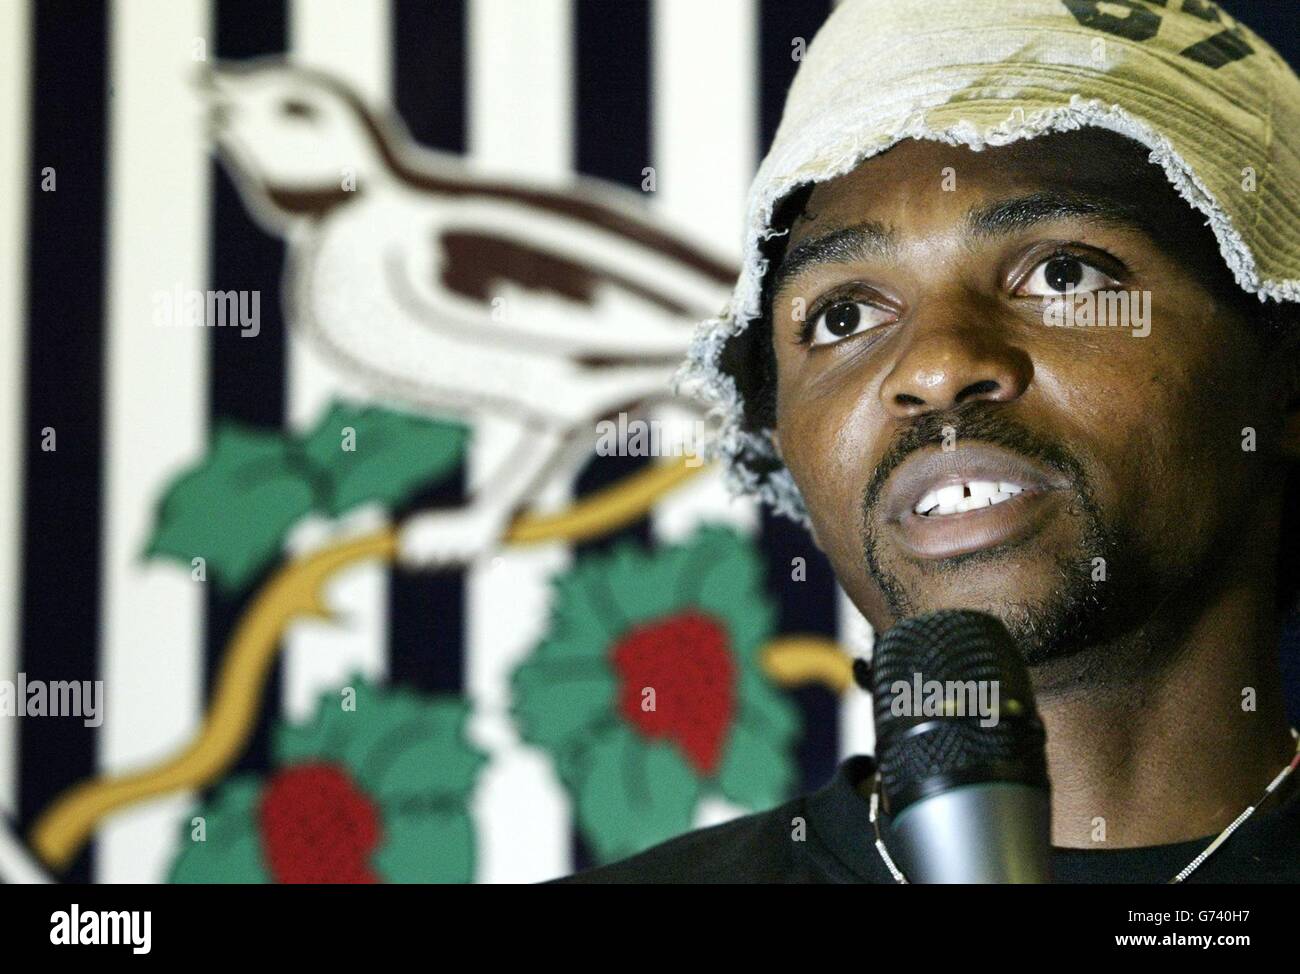 West Bromwich Albion's new signing Kanu at a press conference in West Bromwich. The former Nigeria International has signed a three year contract after leaving Arsenal on a free transfer. Stock Photo